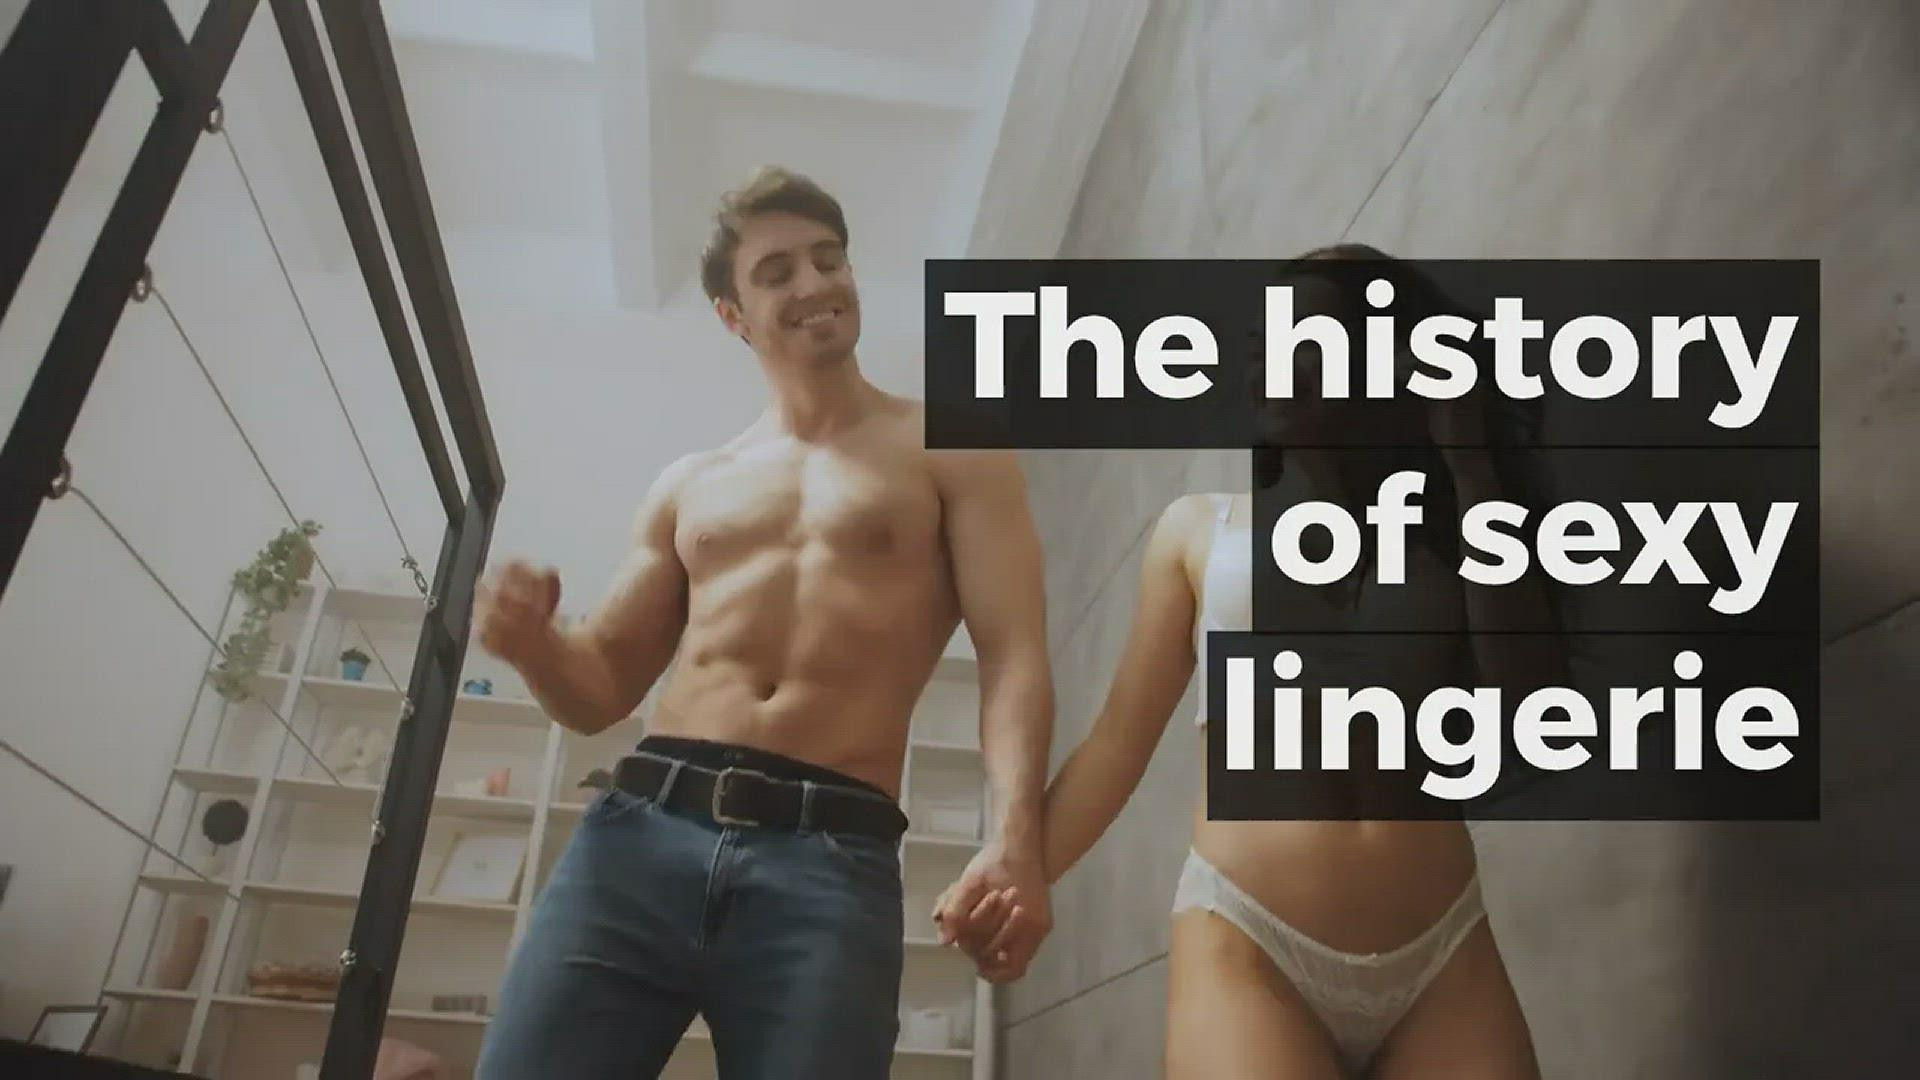 'Video thumbnail for The history of sexy lingerie'